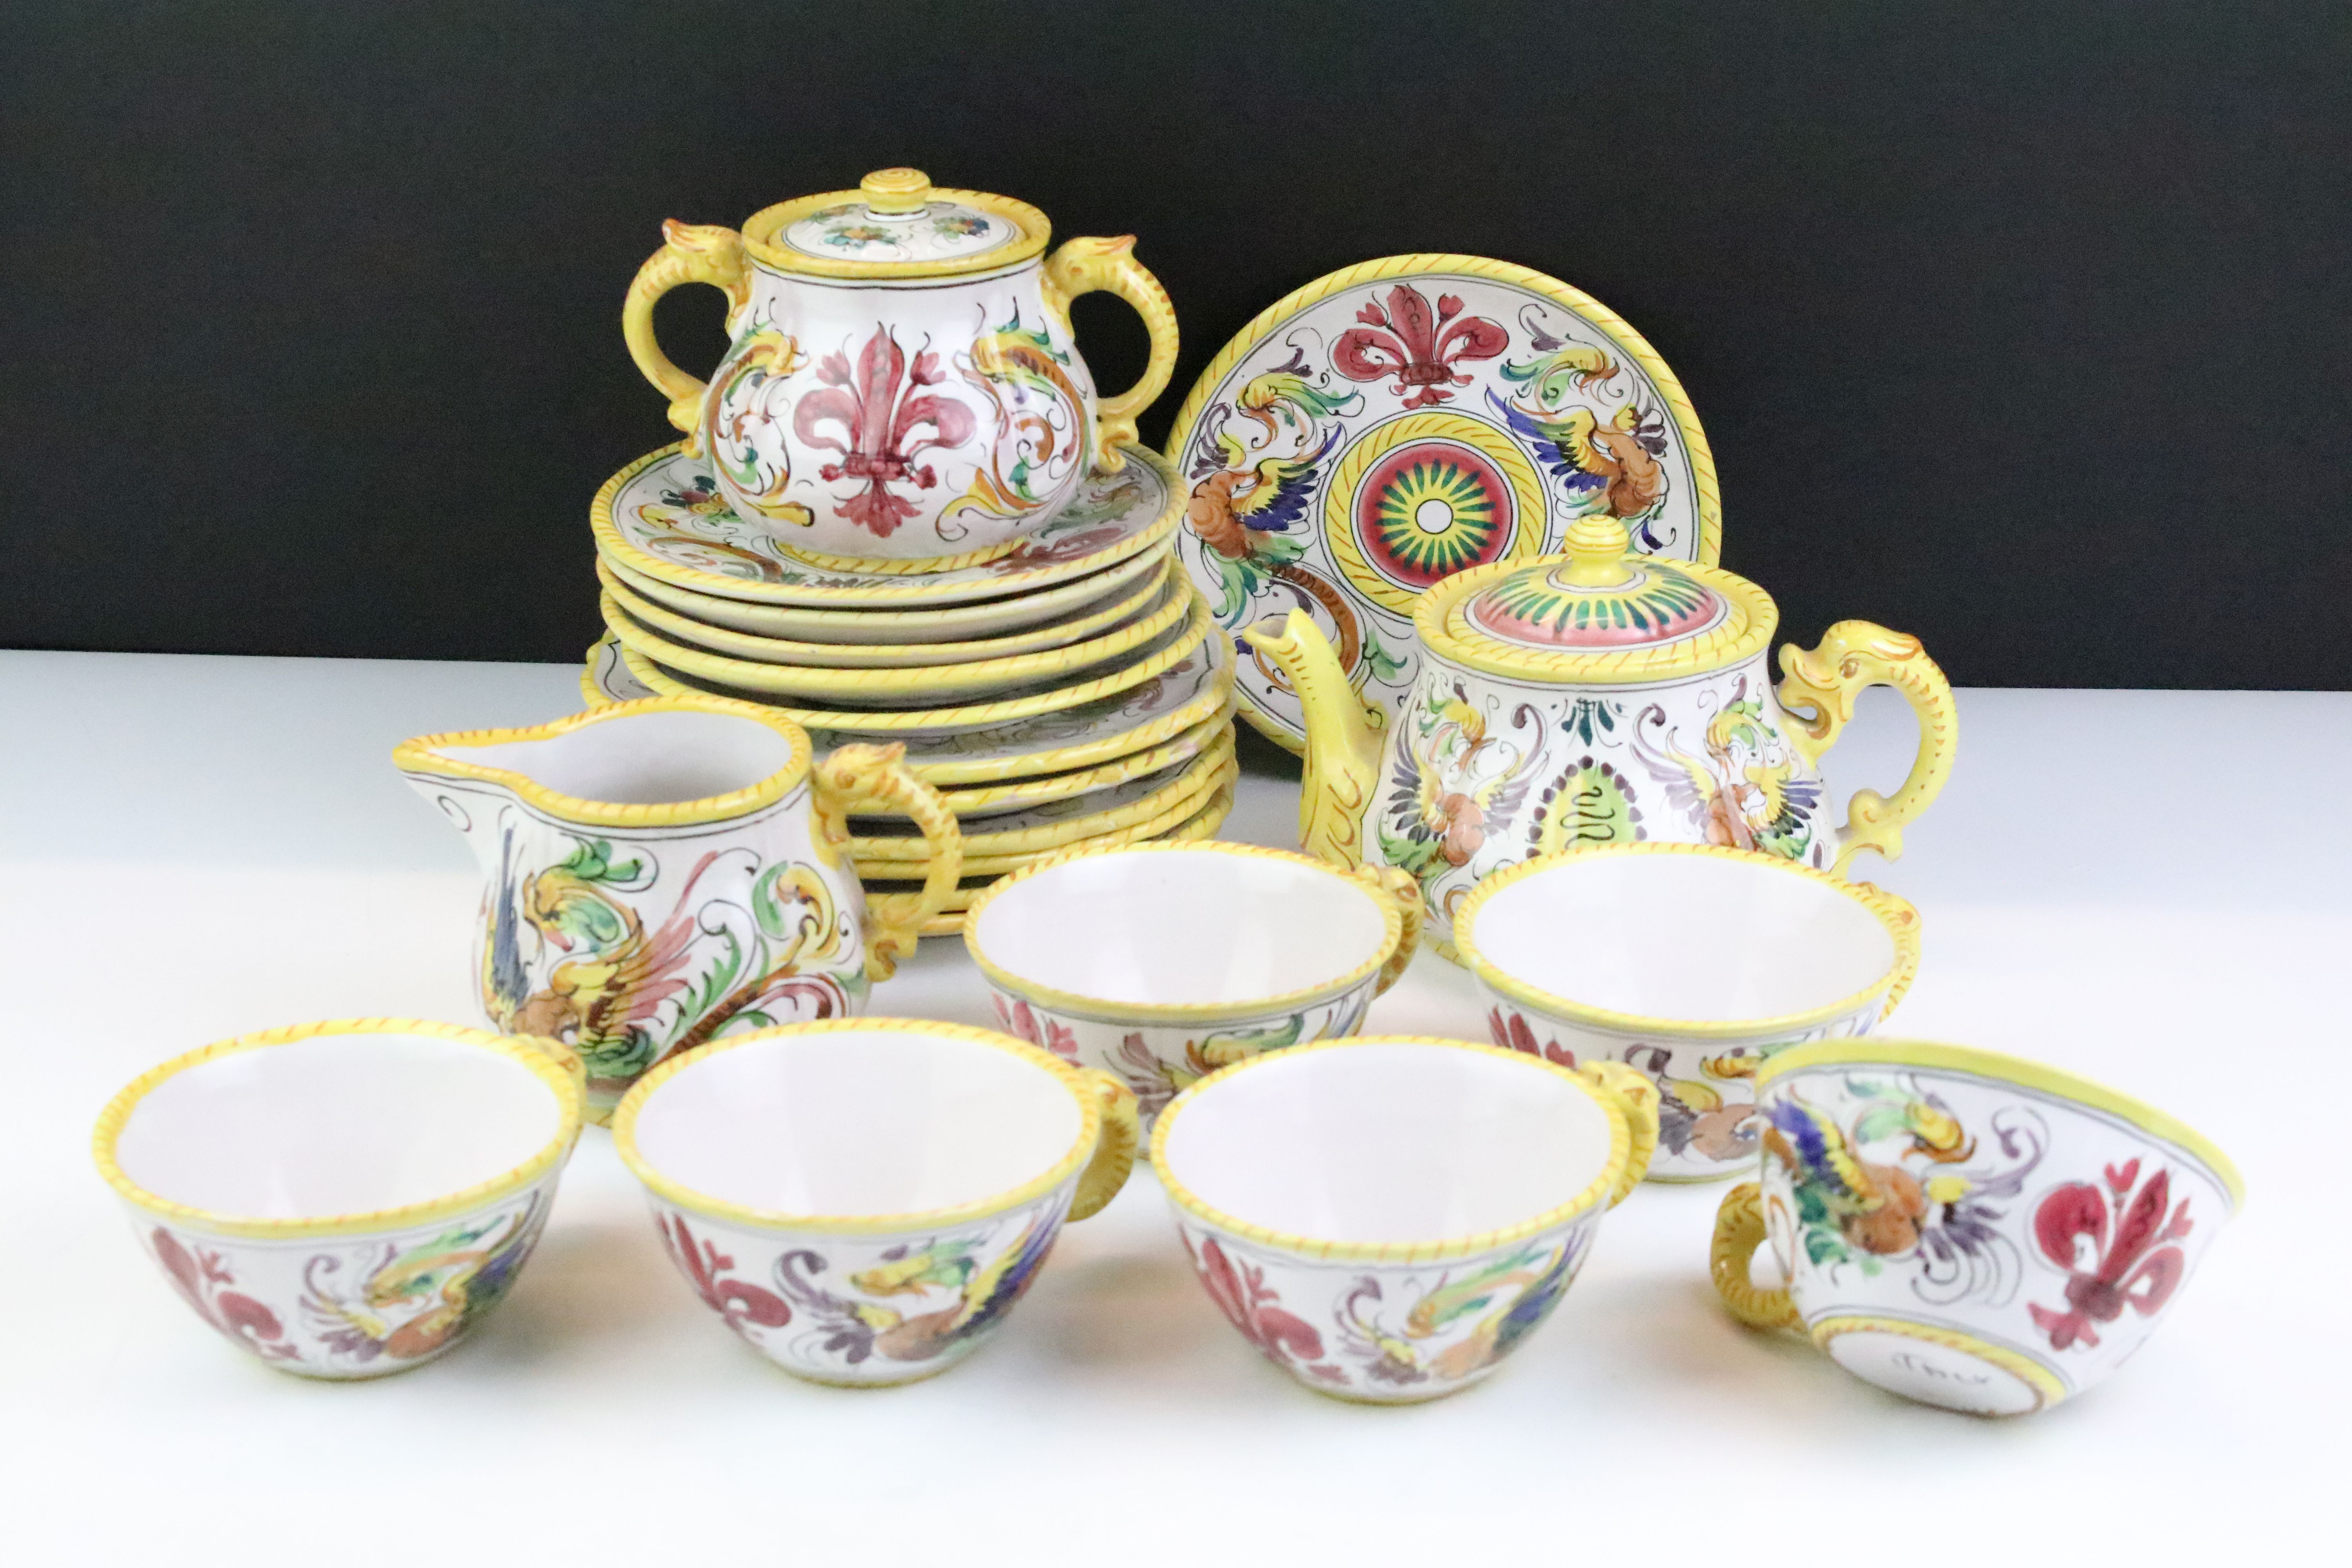 Italian faience tea set with scrolling & floral decoration and yellow border, the lot to include